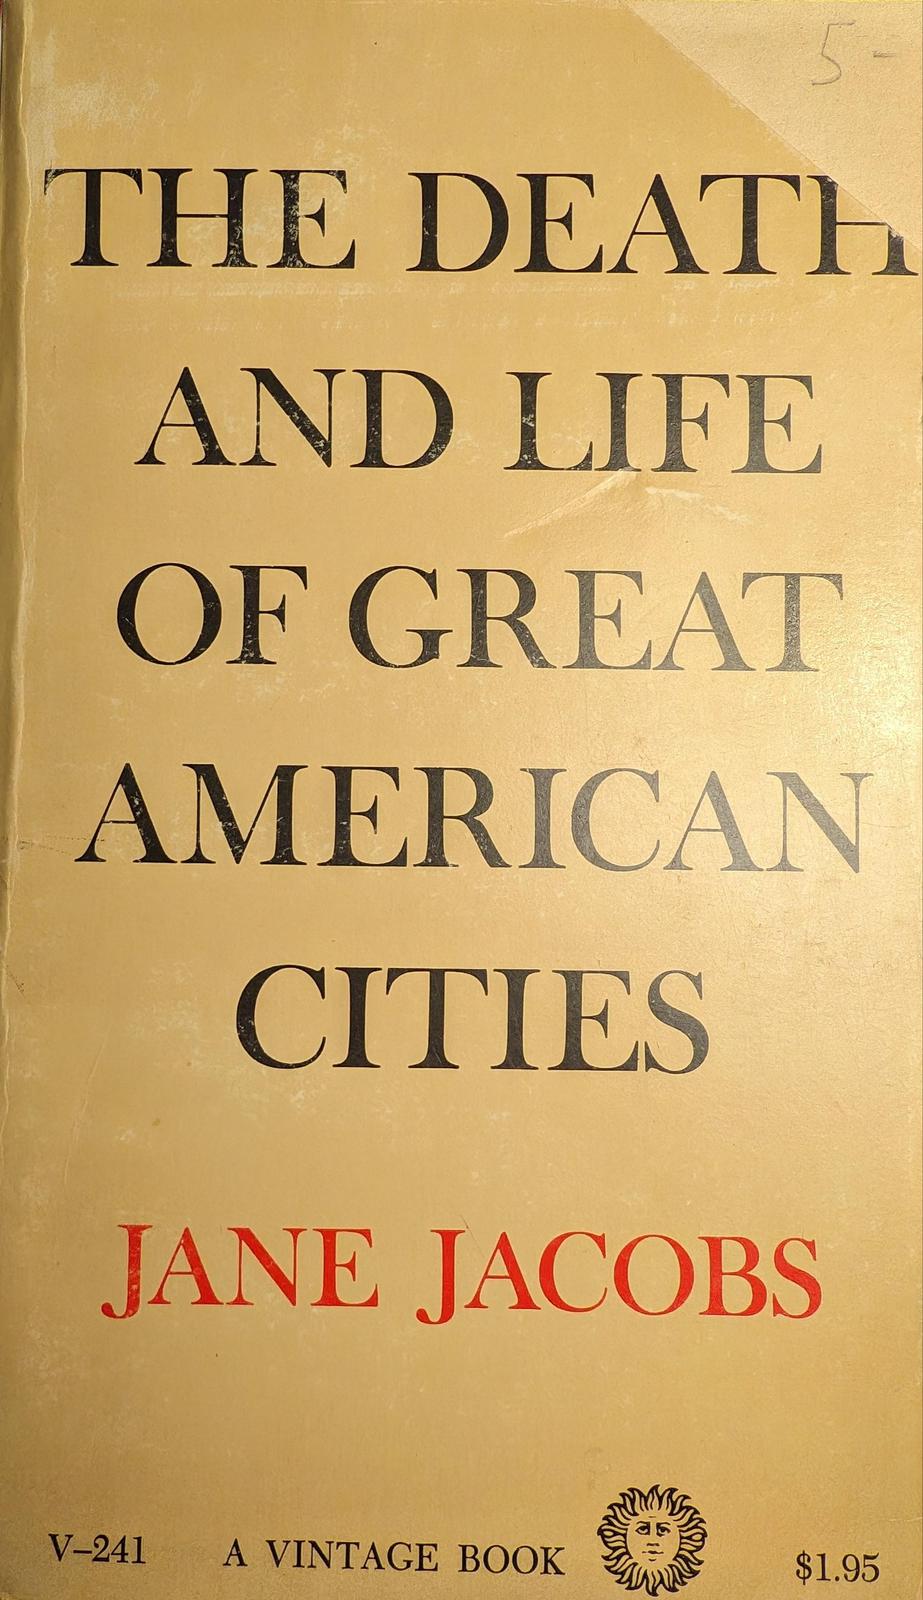 Jane Jacobs: The Death and Life of Great American Cities (1961, Vintage Books)